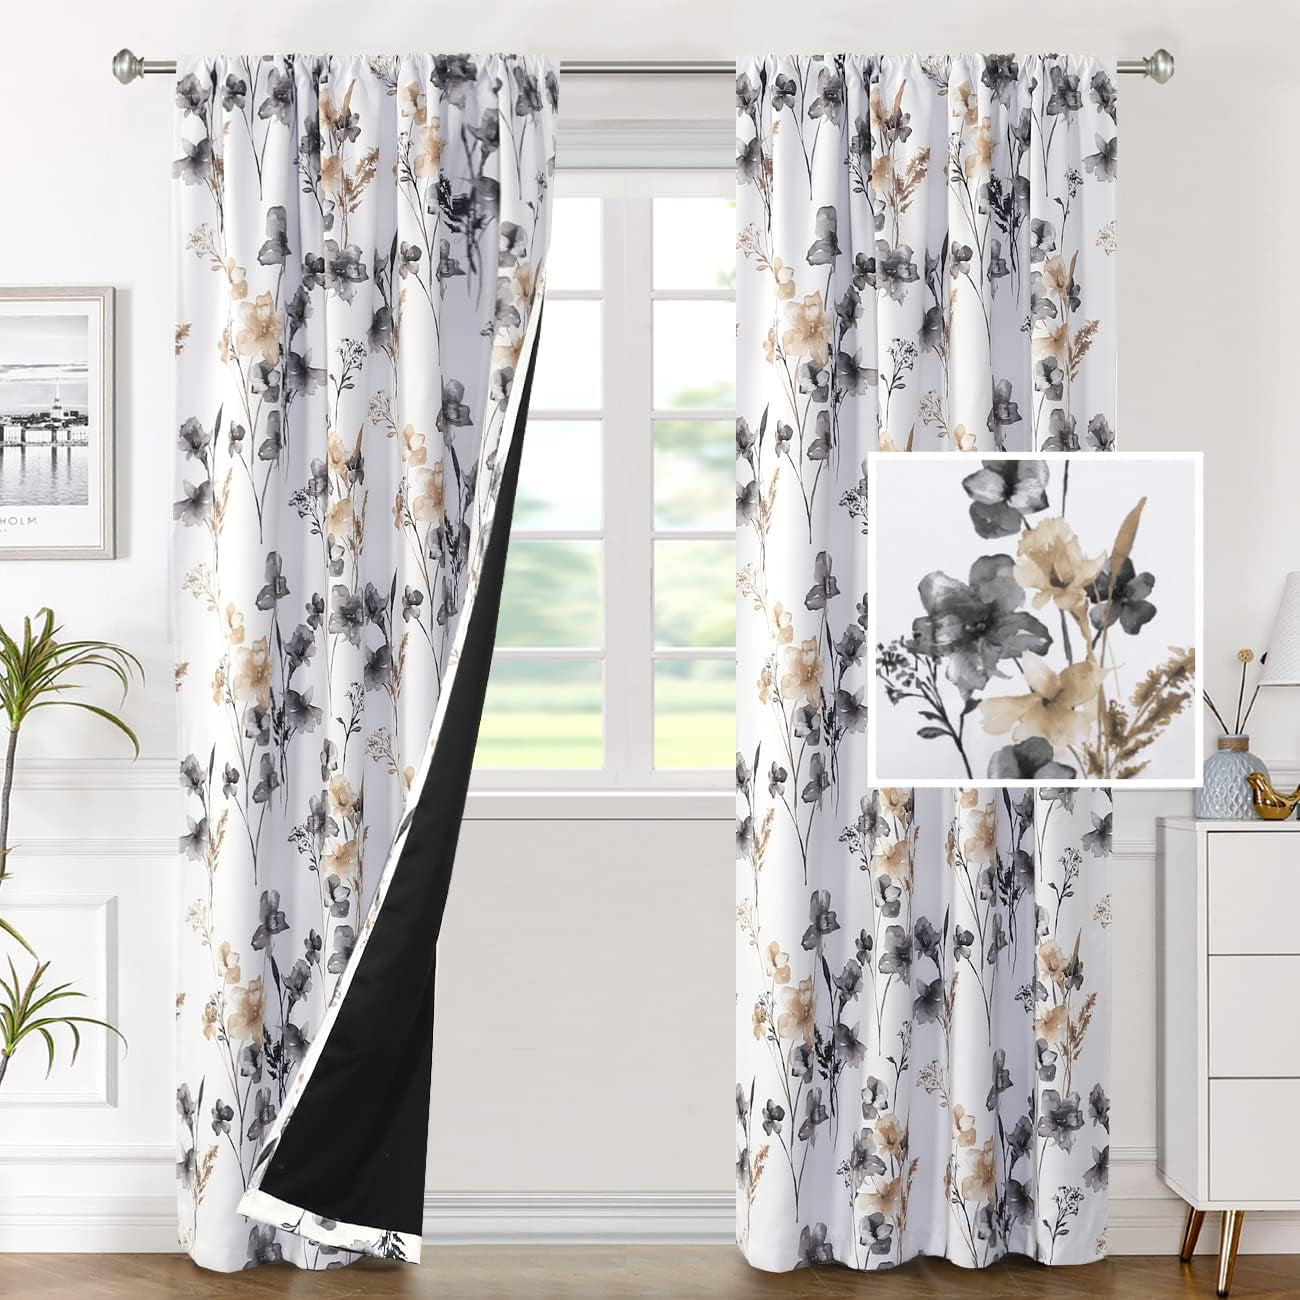 H.VERSAILTEX 100% Blackout Curtains for Bedroom Cattleya Floral Printed Drapes 84 Inches Long Leah Floral Pattern Full Light Blocking Drapes with Black Liner Rod Pocket 2 Panels, Navy/Taupe  H.VERSAILTEX Grey/Taupe 52"W X 84"L 